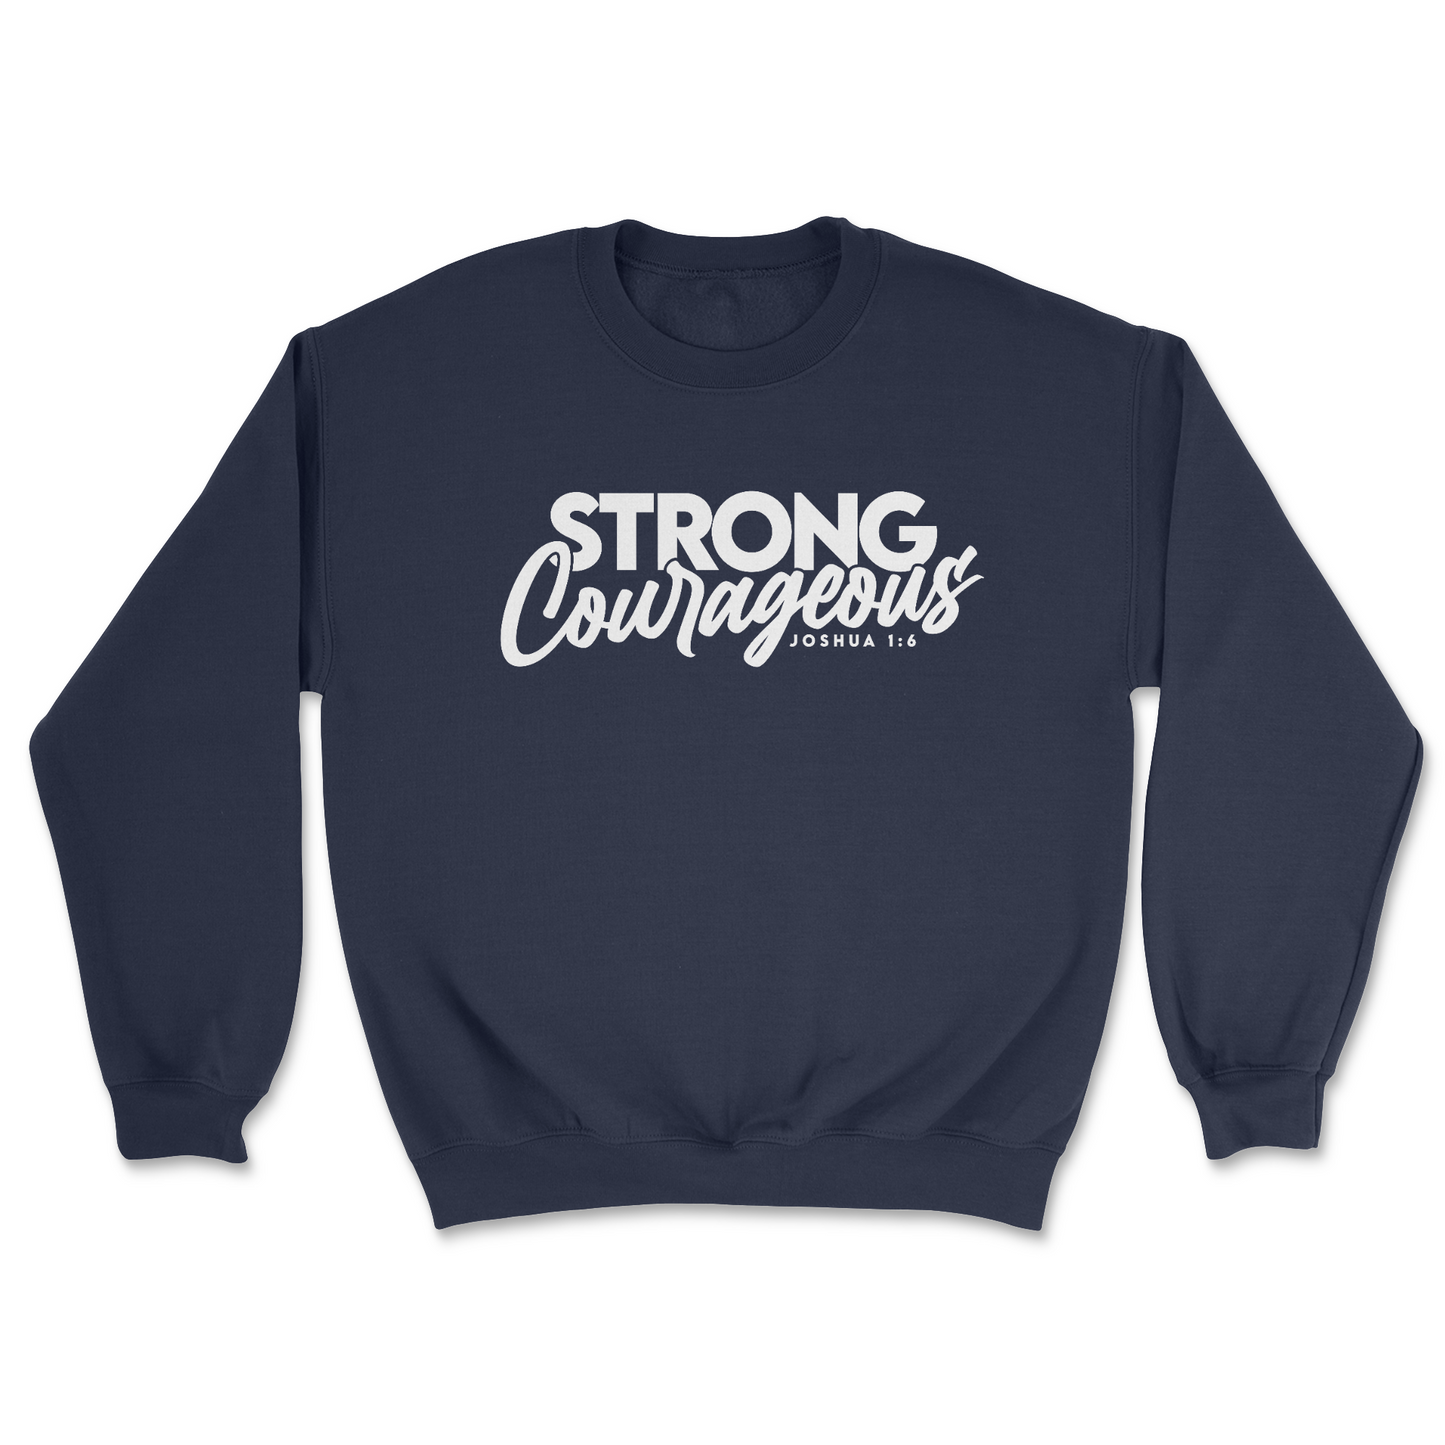 The Prelude Collection: Joshua 1:6 Sweater